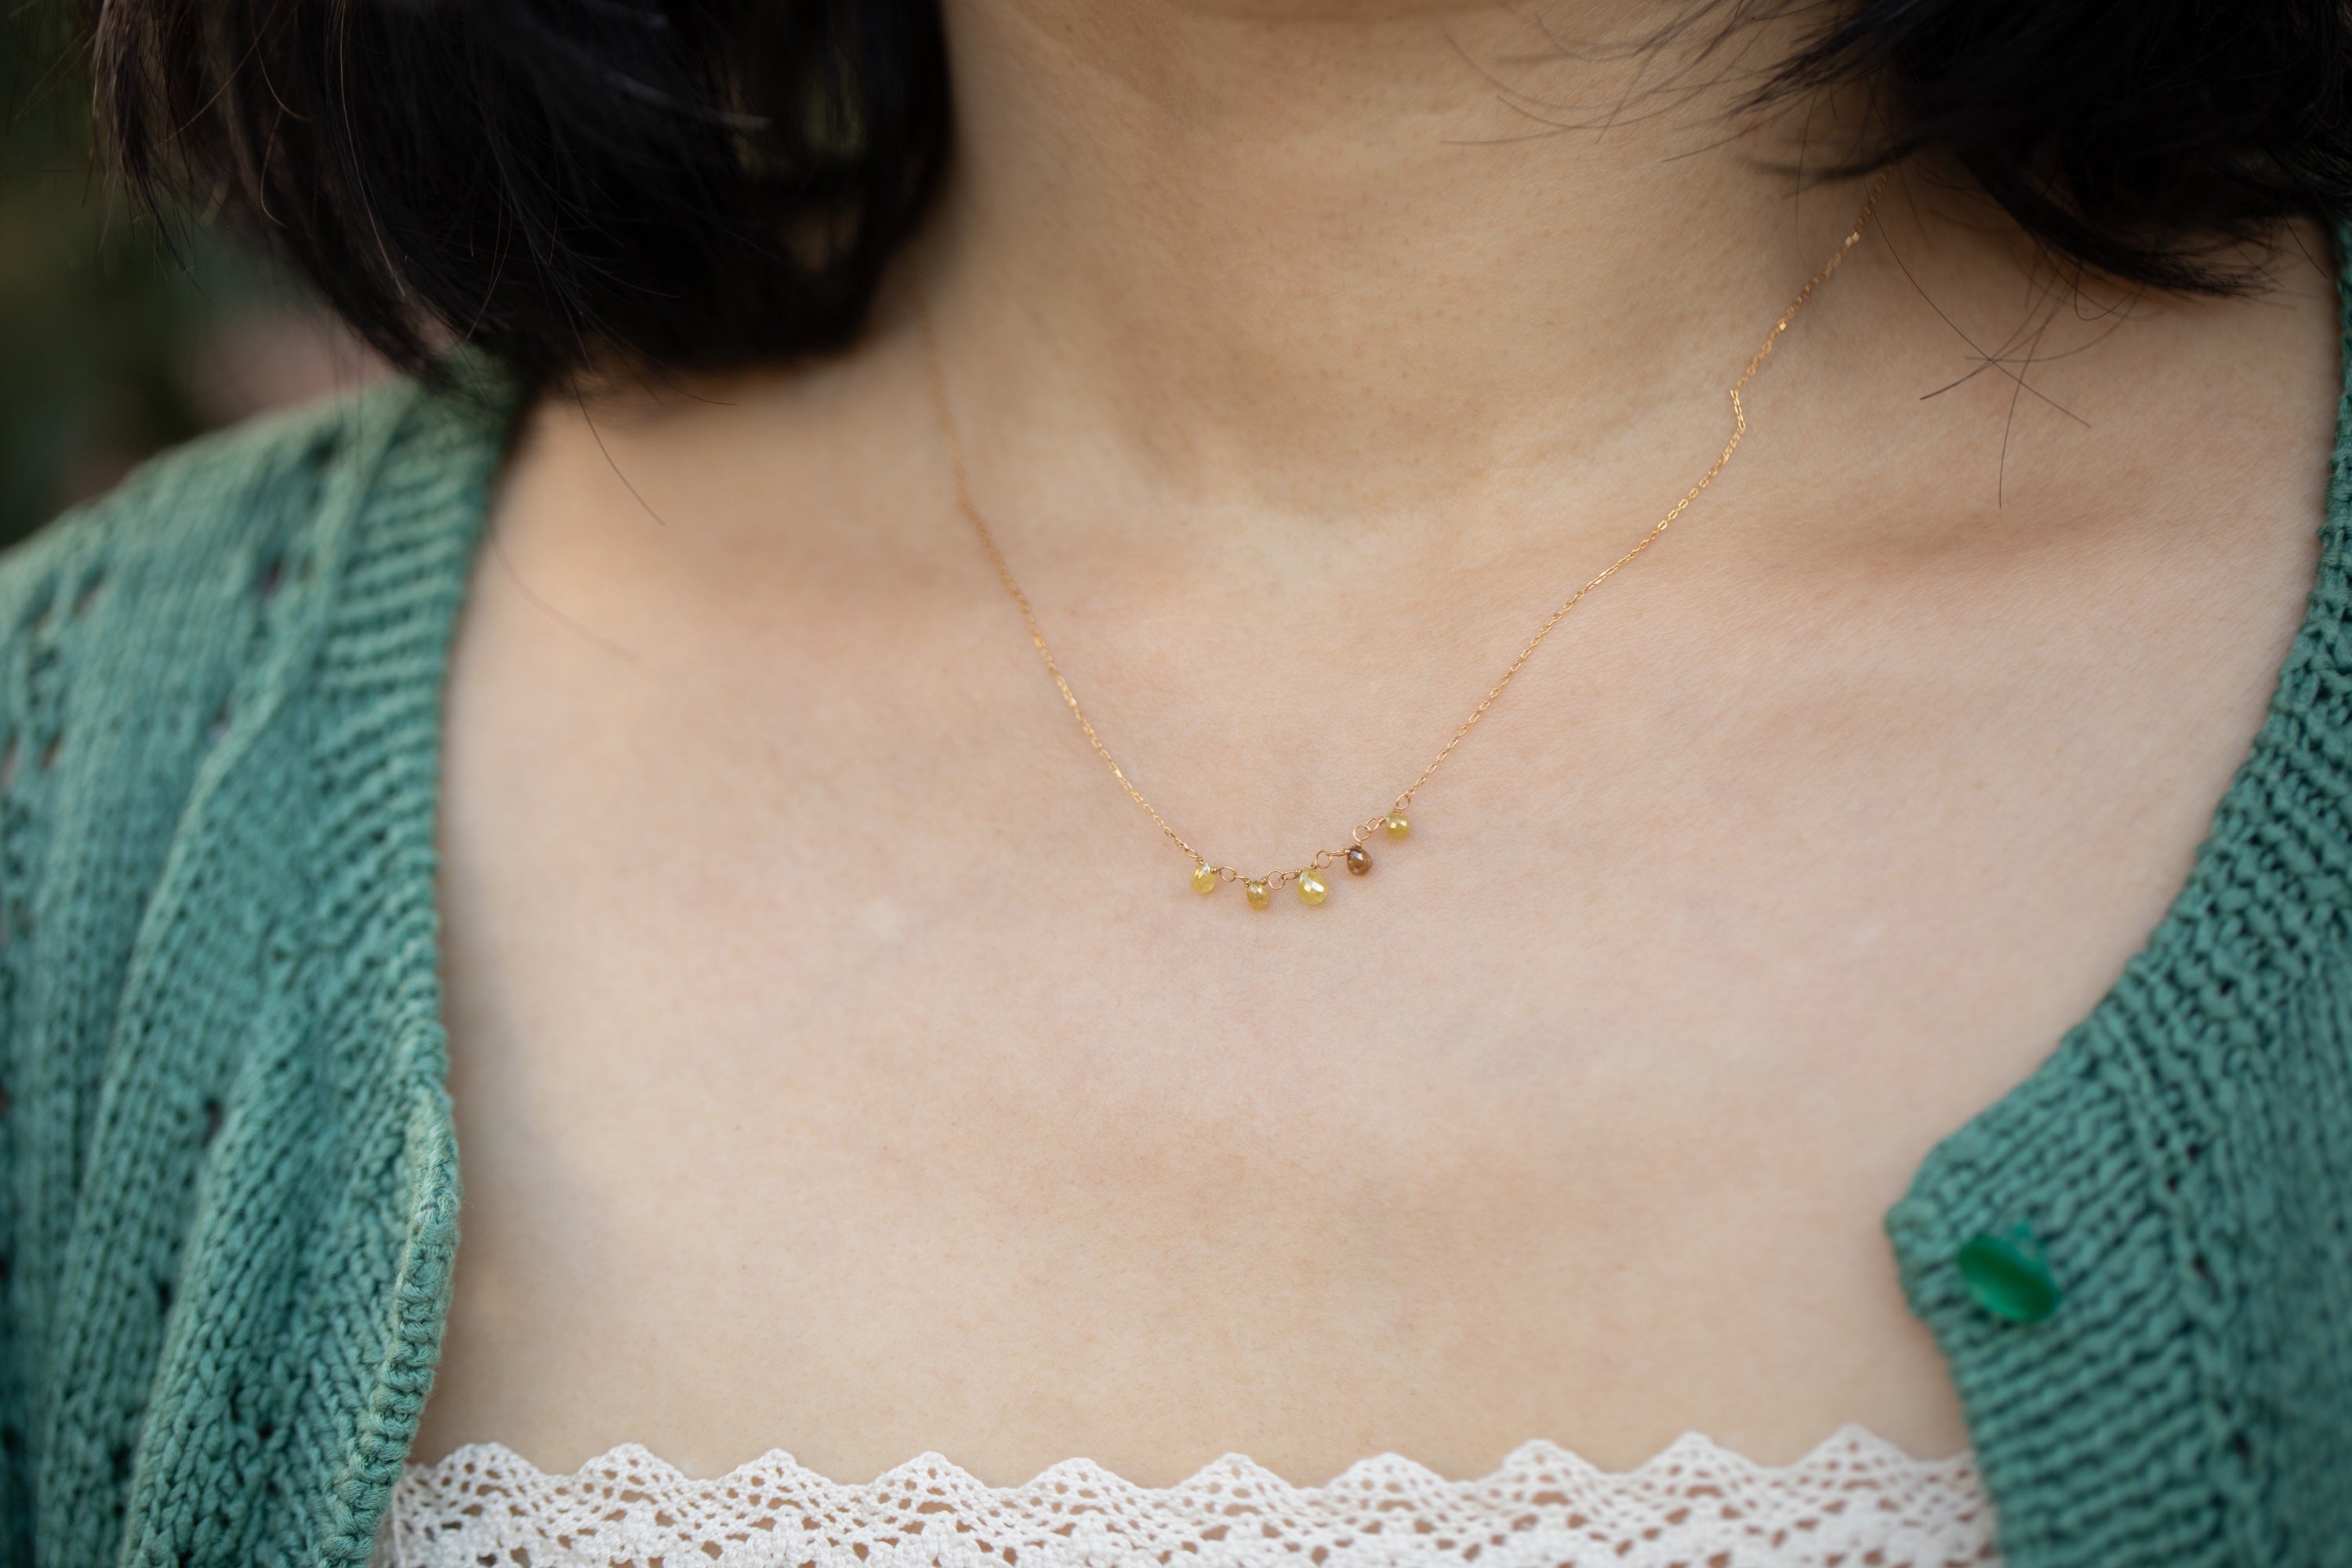 5 Sunny Tiny Briolettes on 18k Gold Chain